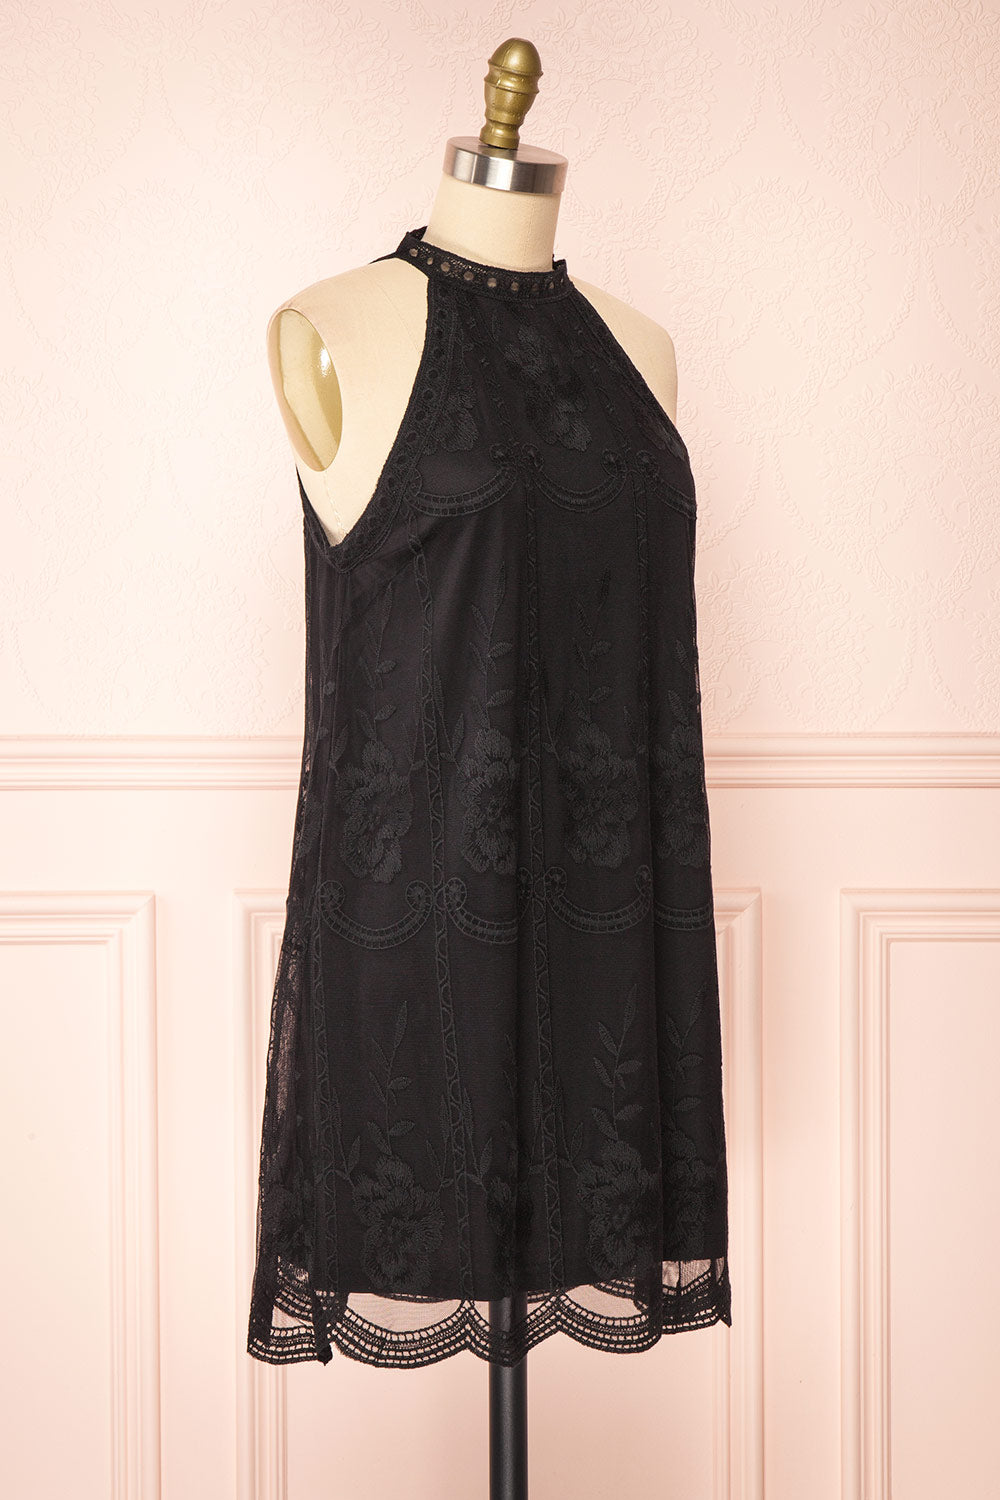 Silens Black Short Sleeveless Lace Halter Dress | Boutique 1861 side view 